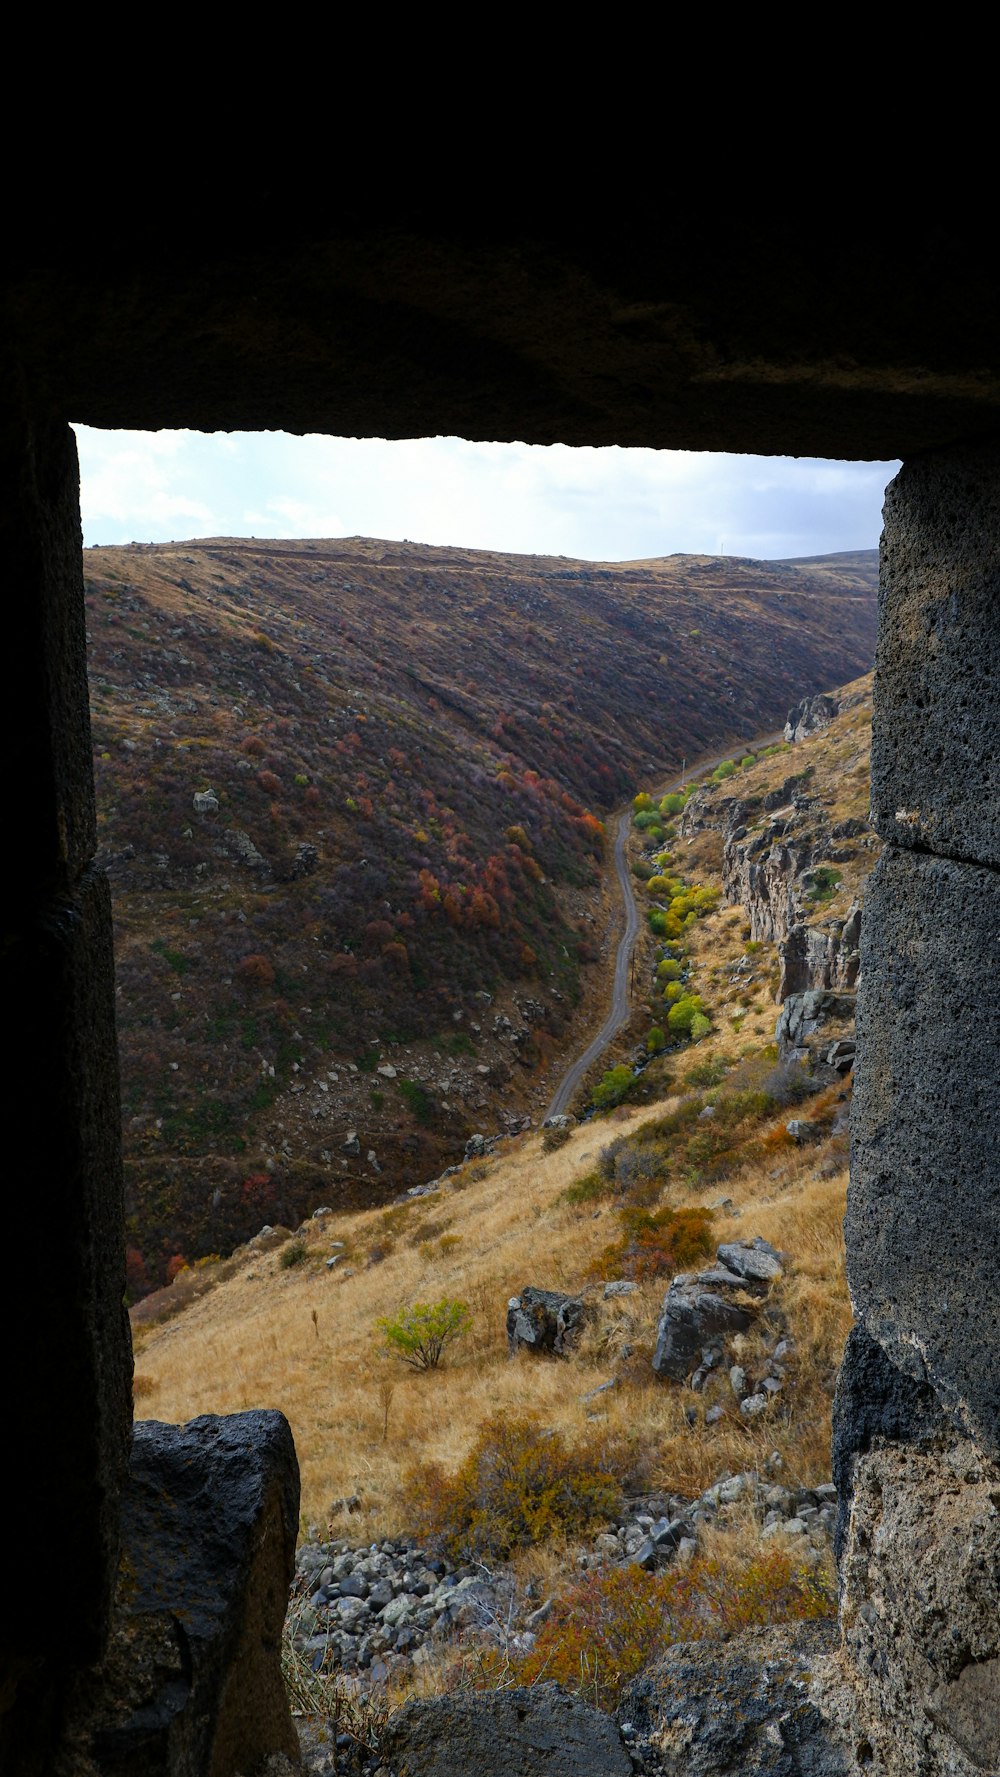 a view of a canyon from a window